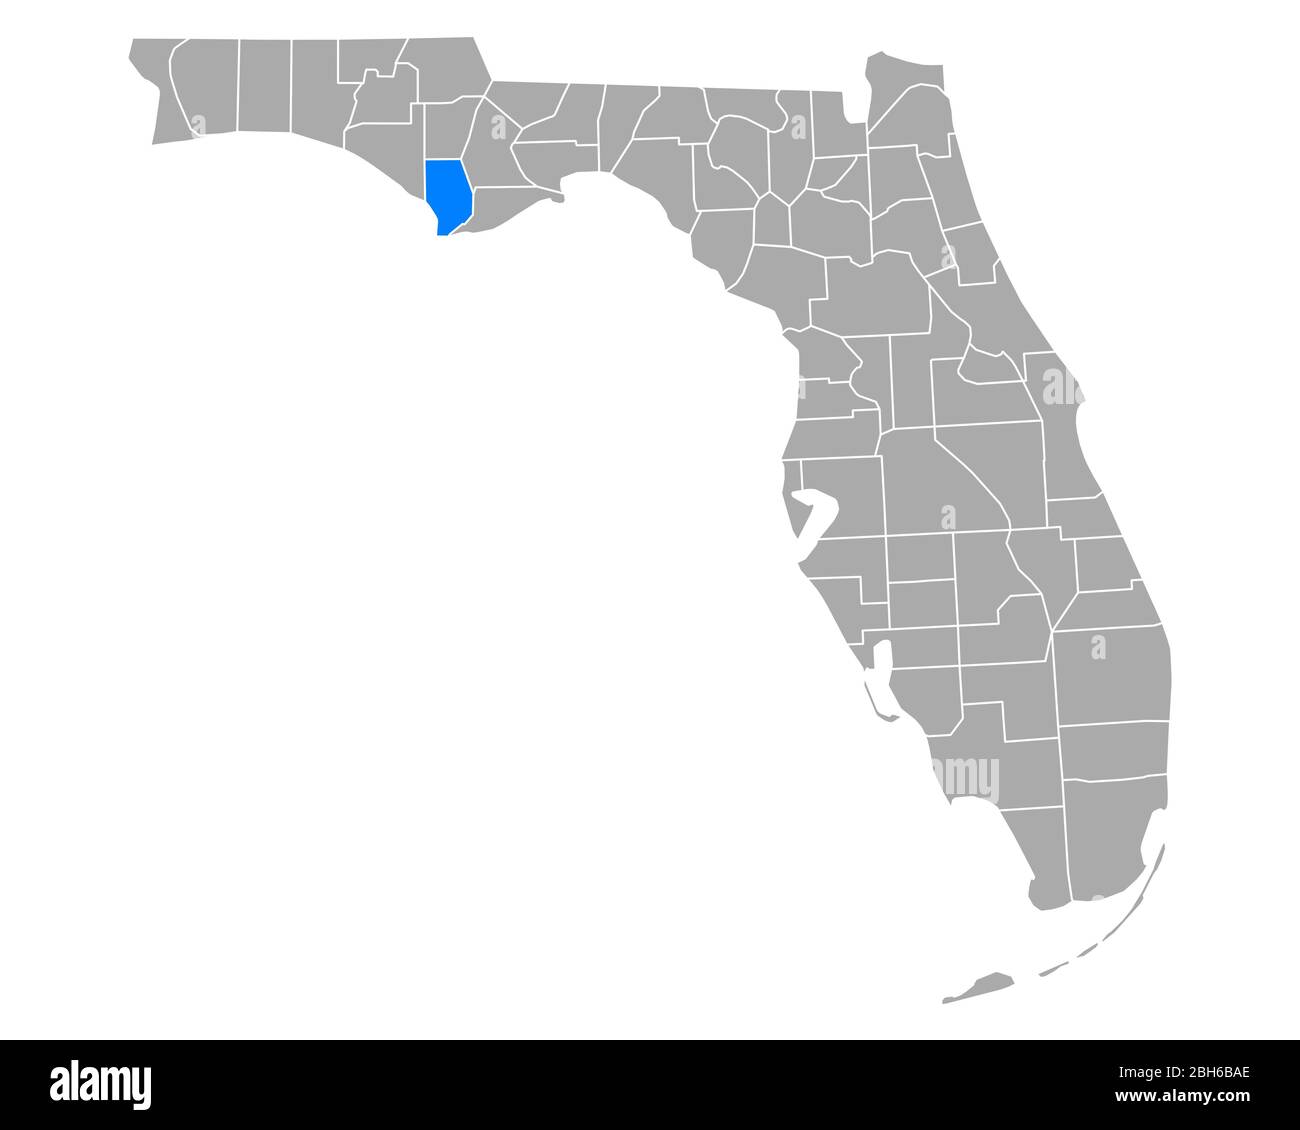 Map Of Gulf In Florida 2BH6BAE 